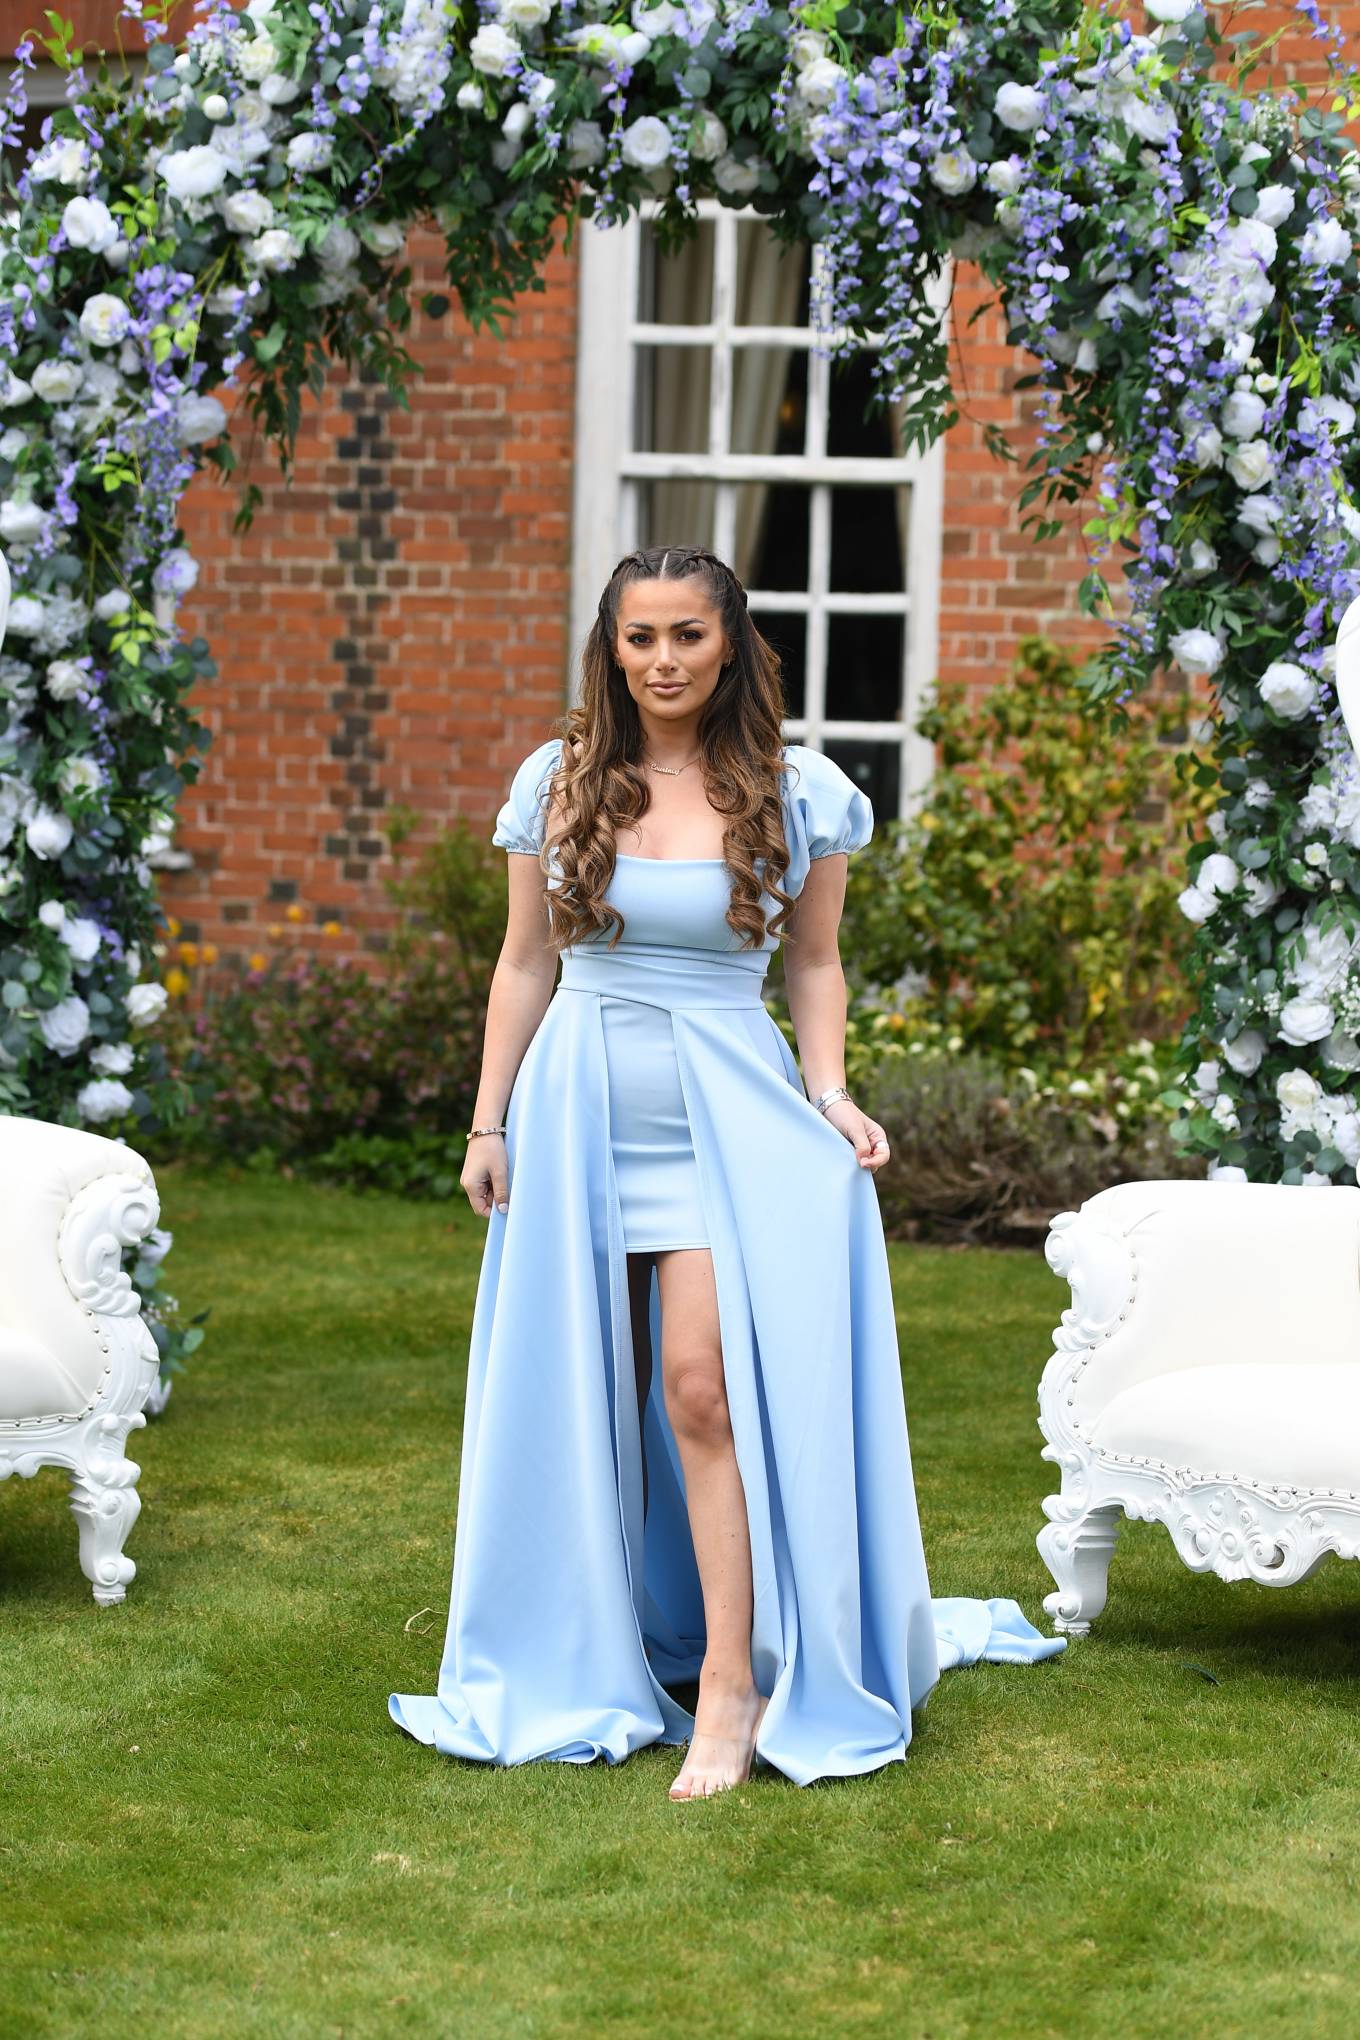 Courtney Green 2021 : Courtney Green – The Only Way is Essex TV Show filming – Bridgerton Special in Essex-01